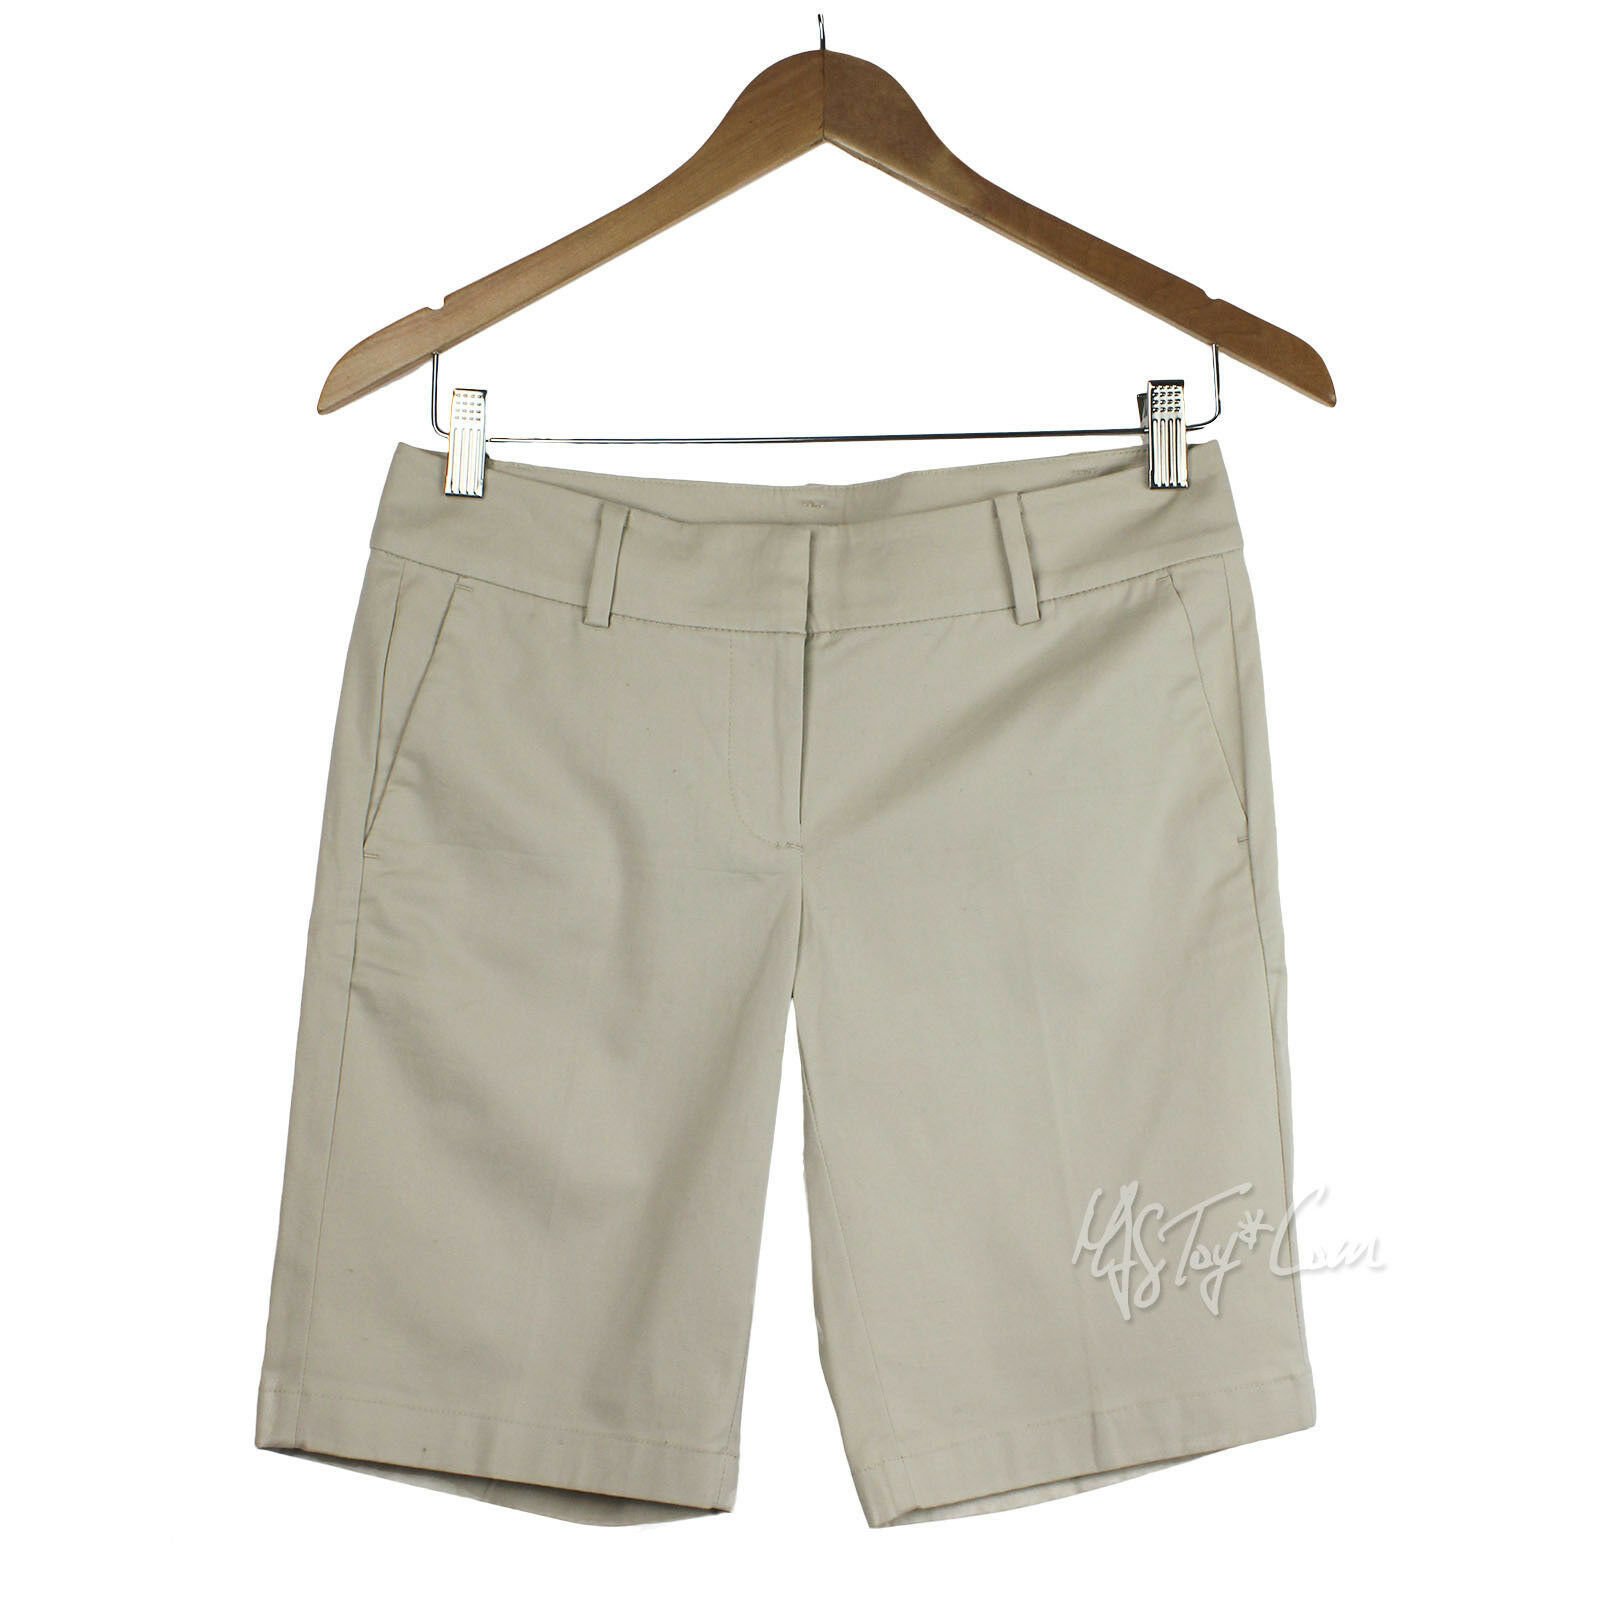 Primary image for NWT Ann Taylor Women's Petite Type Boardwalk Flat Front Short Khaki Size 2-6 $49